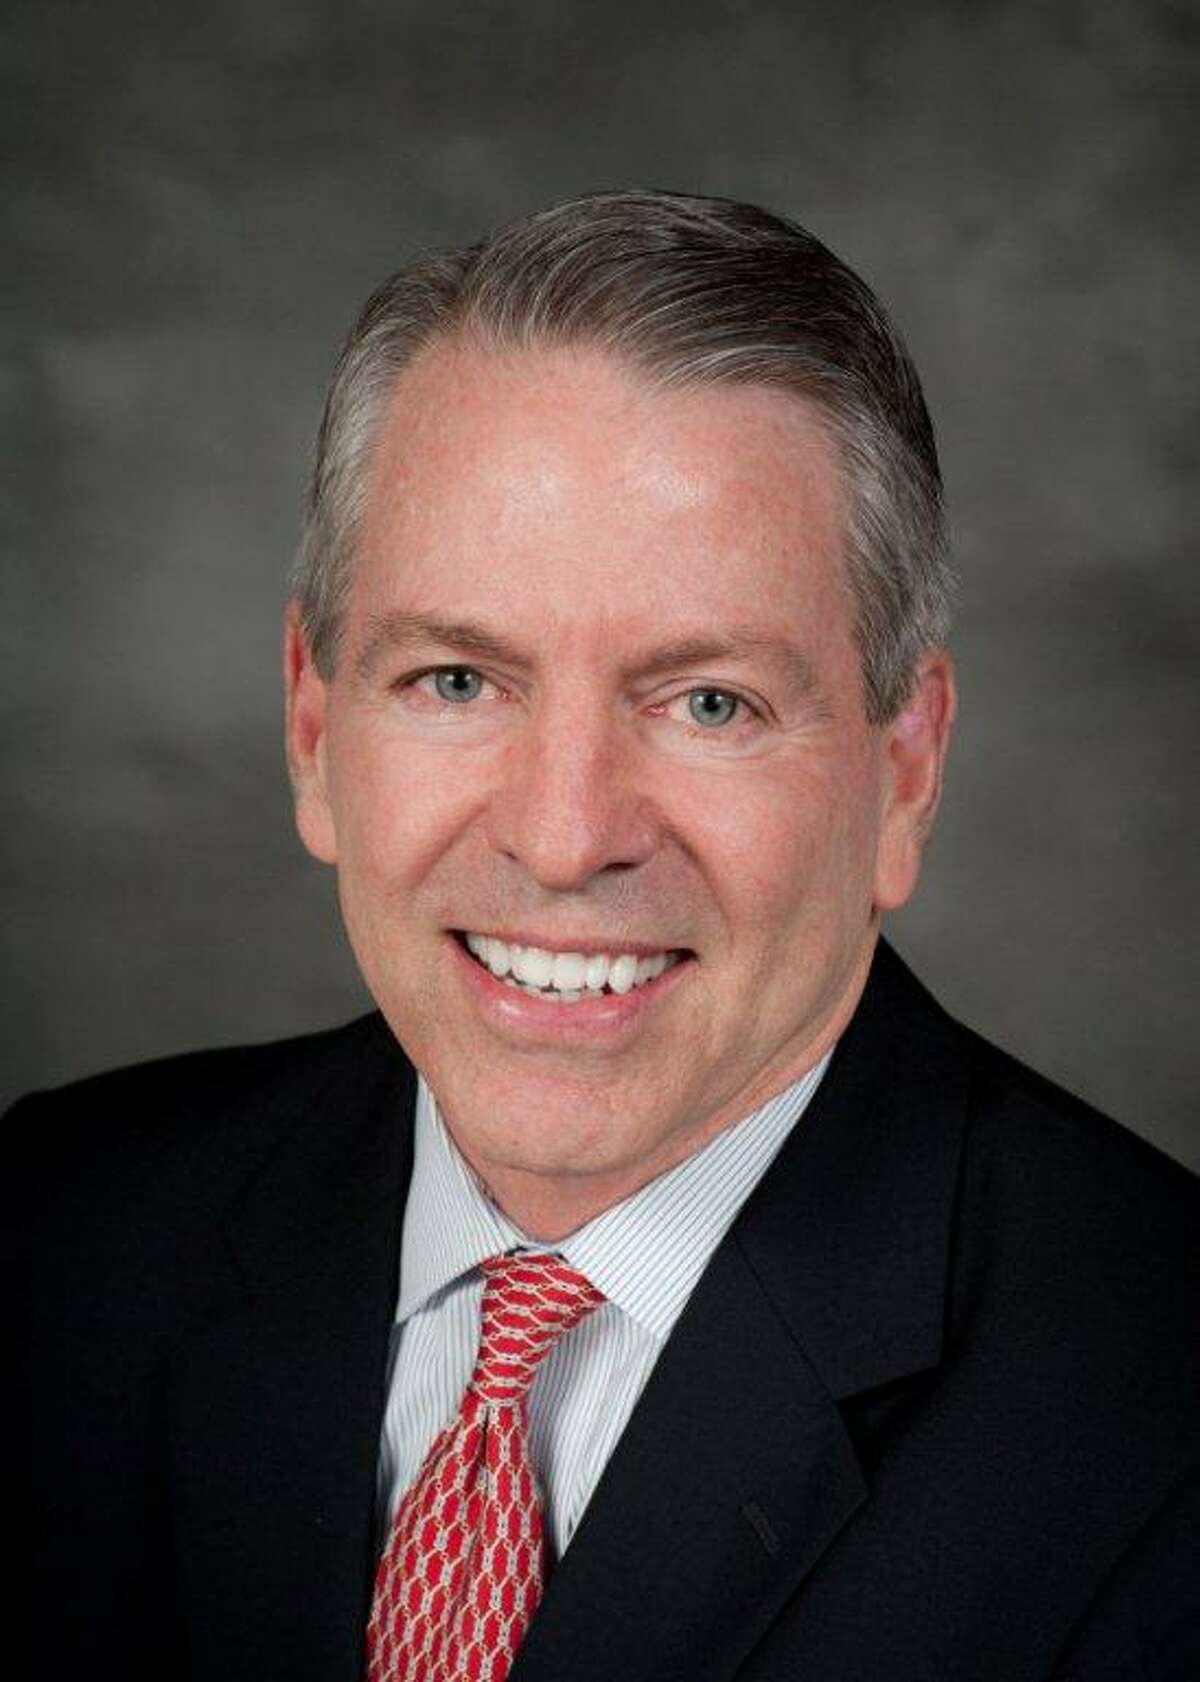 BBVA Compass announced that Larry Ellis has been appointed senior vice president and Houston team leader for its Commercial Banking group. Ellis is responsible for managing and developing a group of up to six Houston-based relationship managers, who target companies with $25 million to $500 million in revenue.